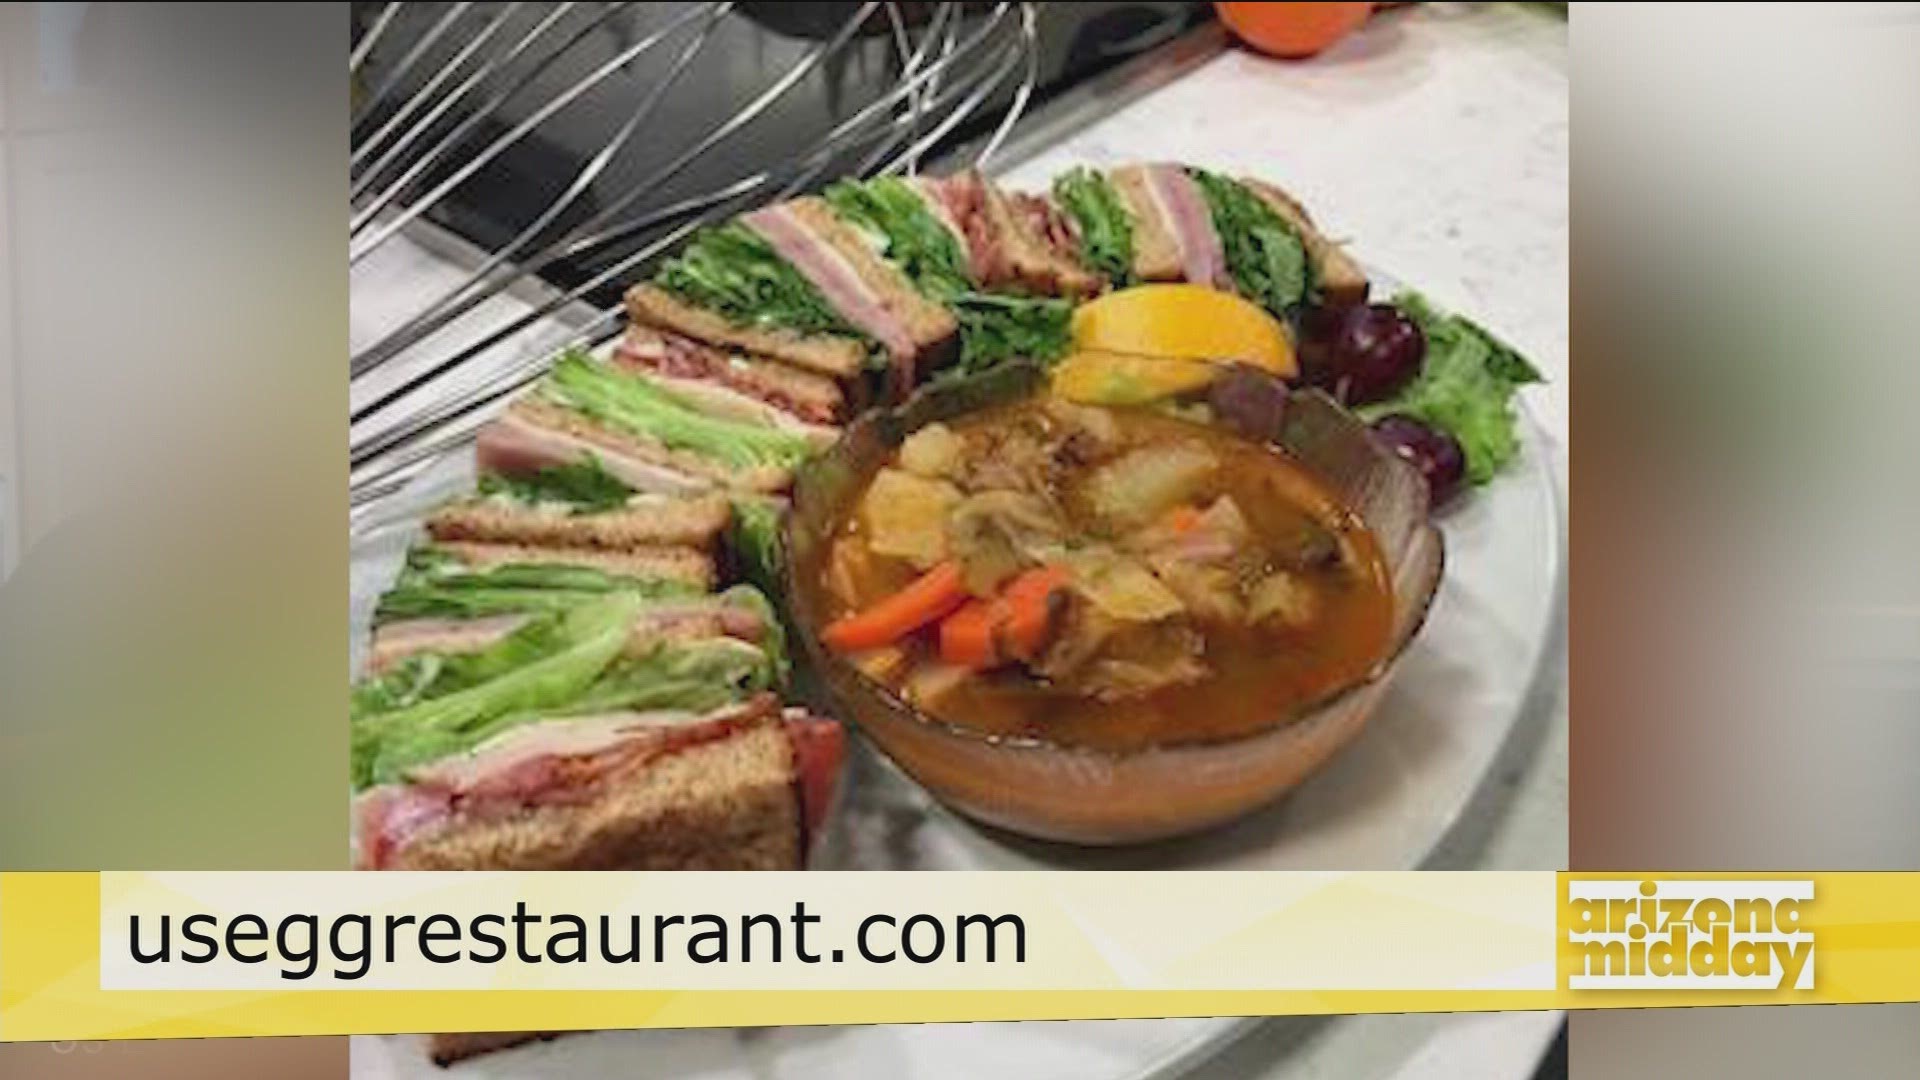 Chef Mario shows us how to create the perfect winter soup with leftovers from our holiday meals